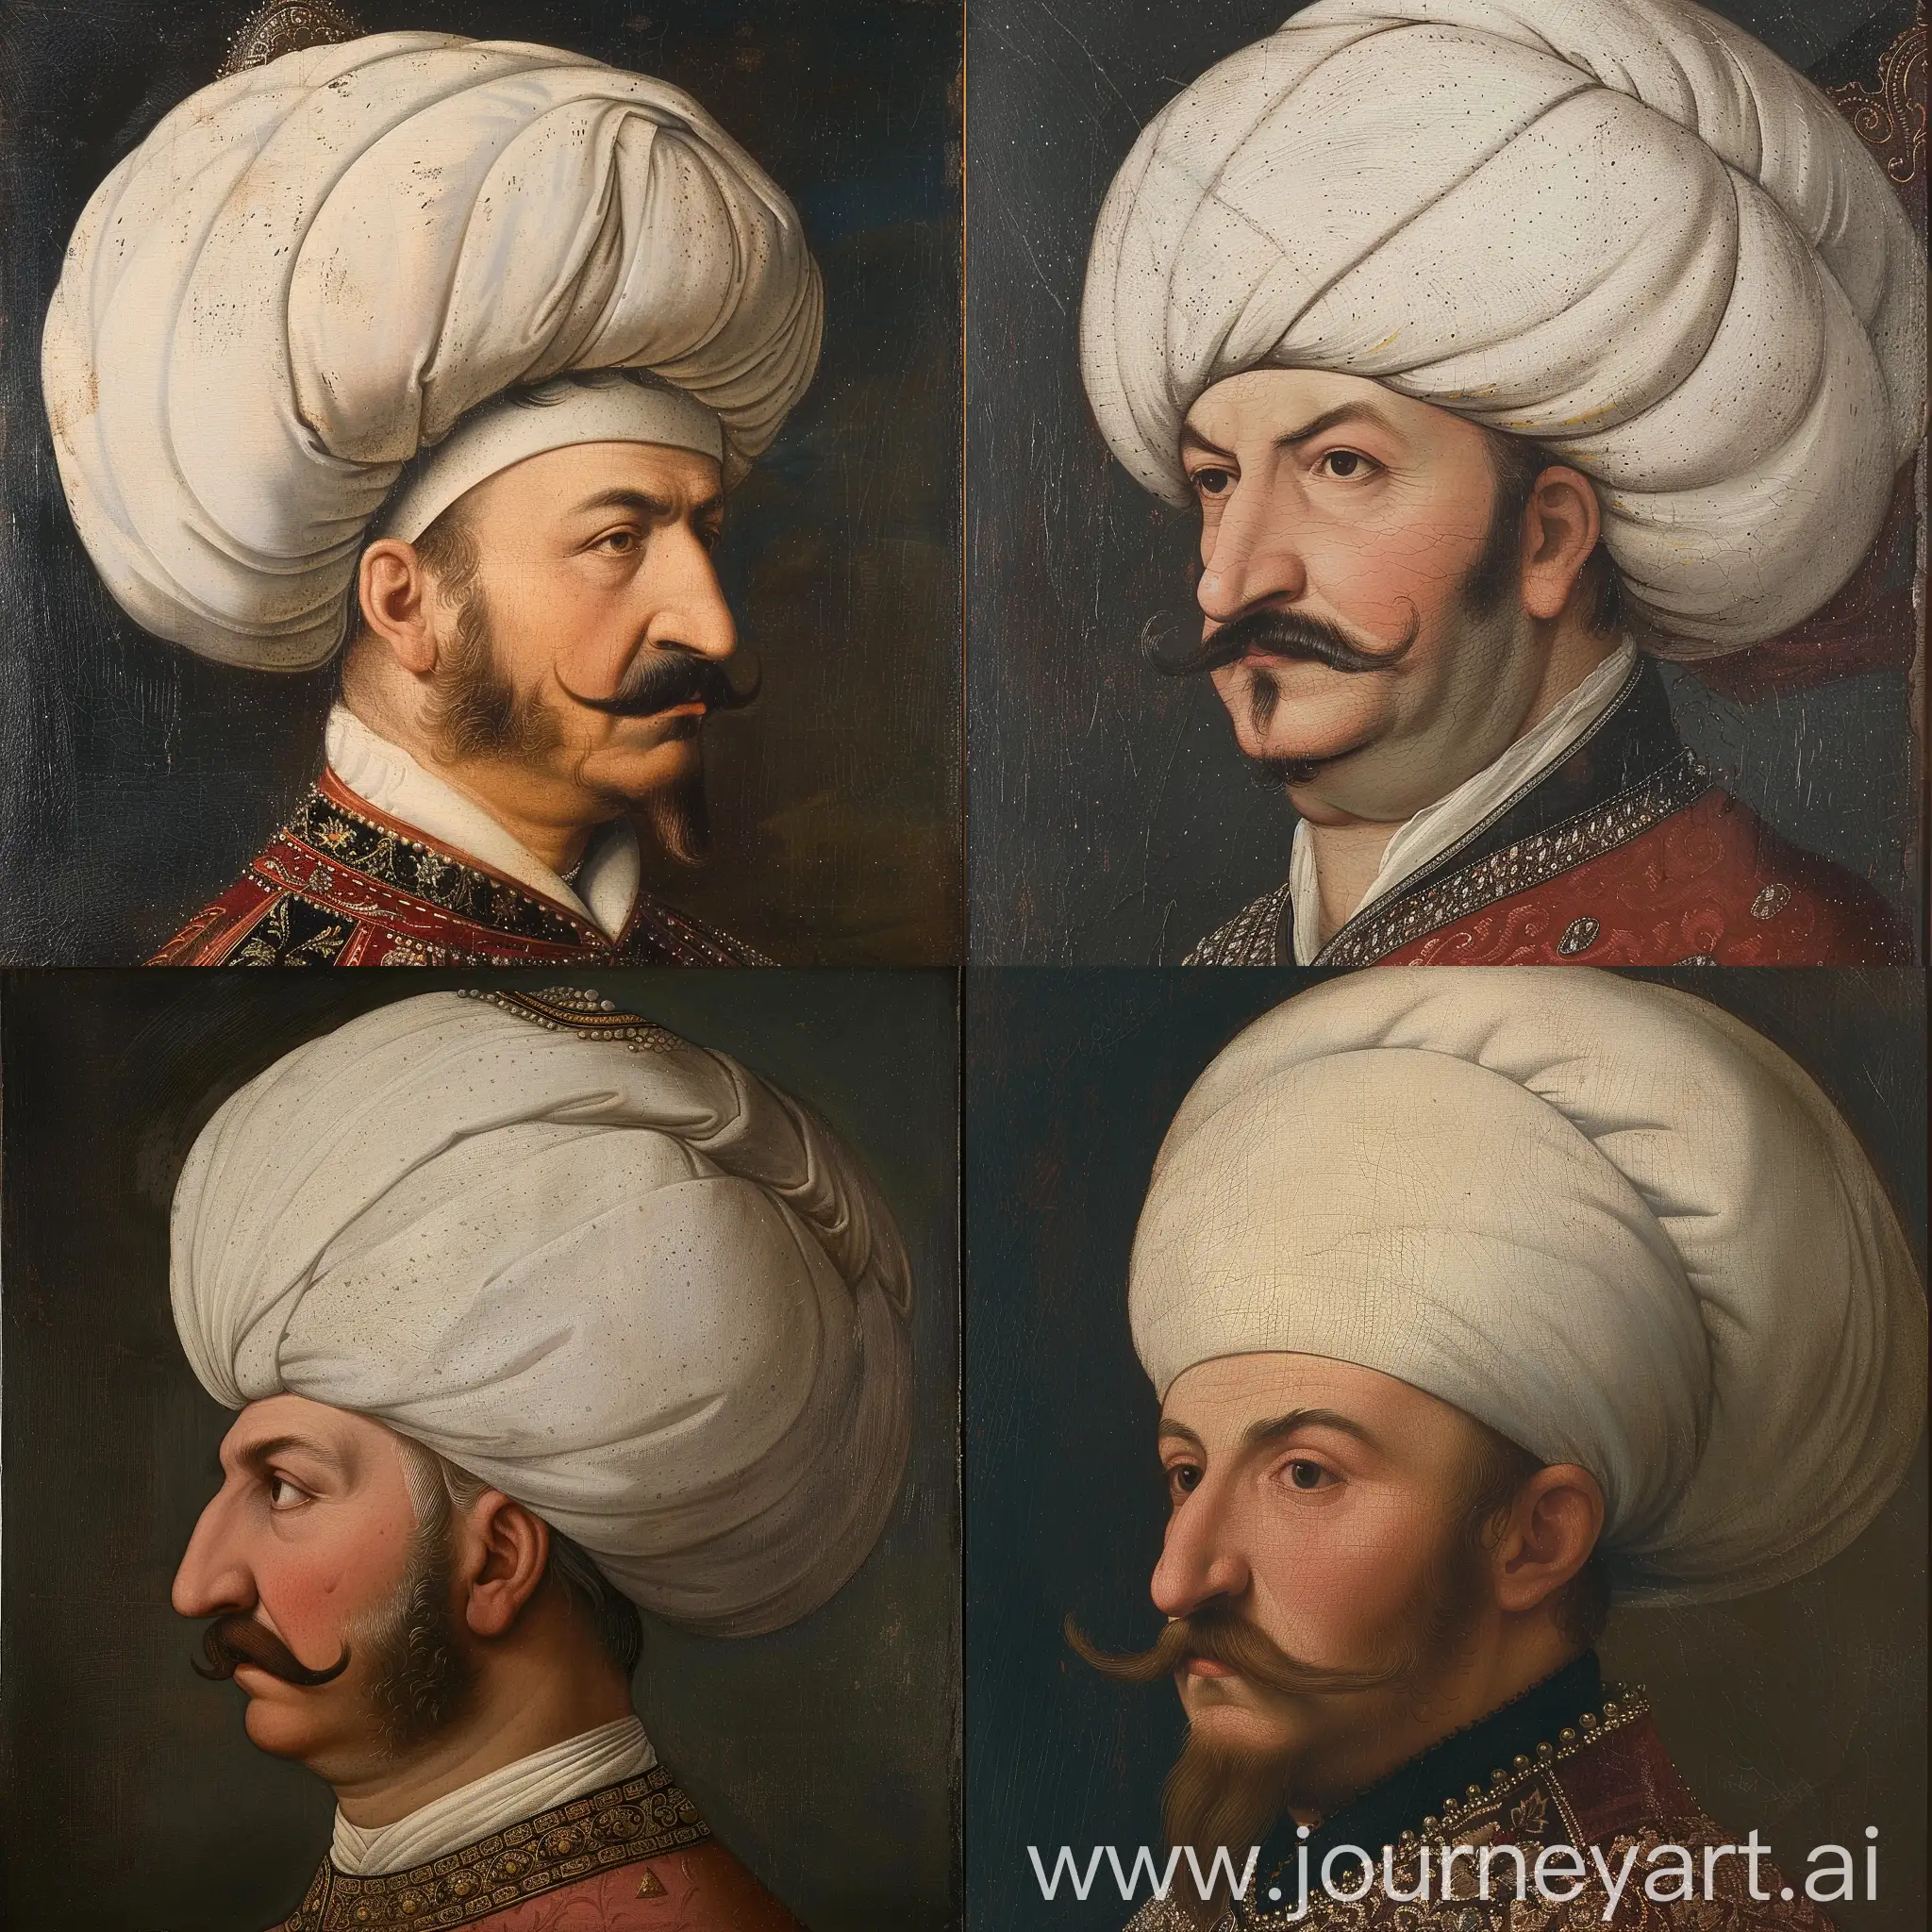 Portrait-of-Ottoman-Sultan-Suleiman-the-Magnificent-with-Handlebar-Mustache-and-Captivating-Eyes